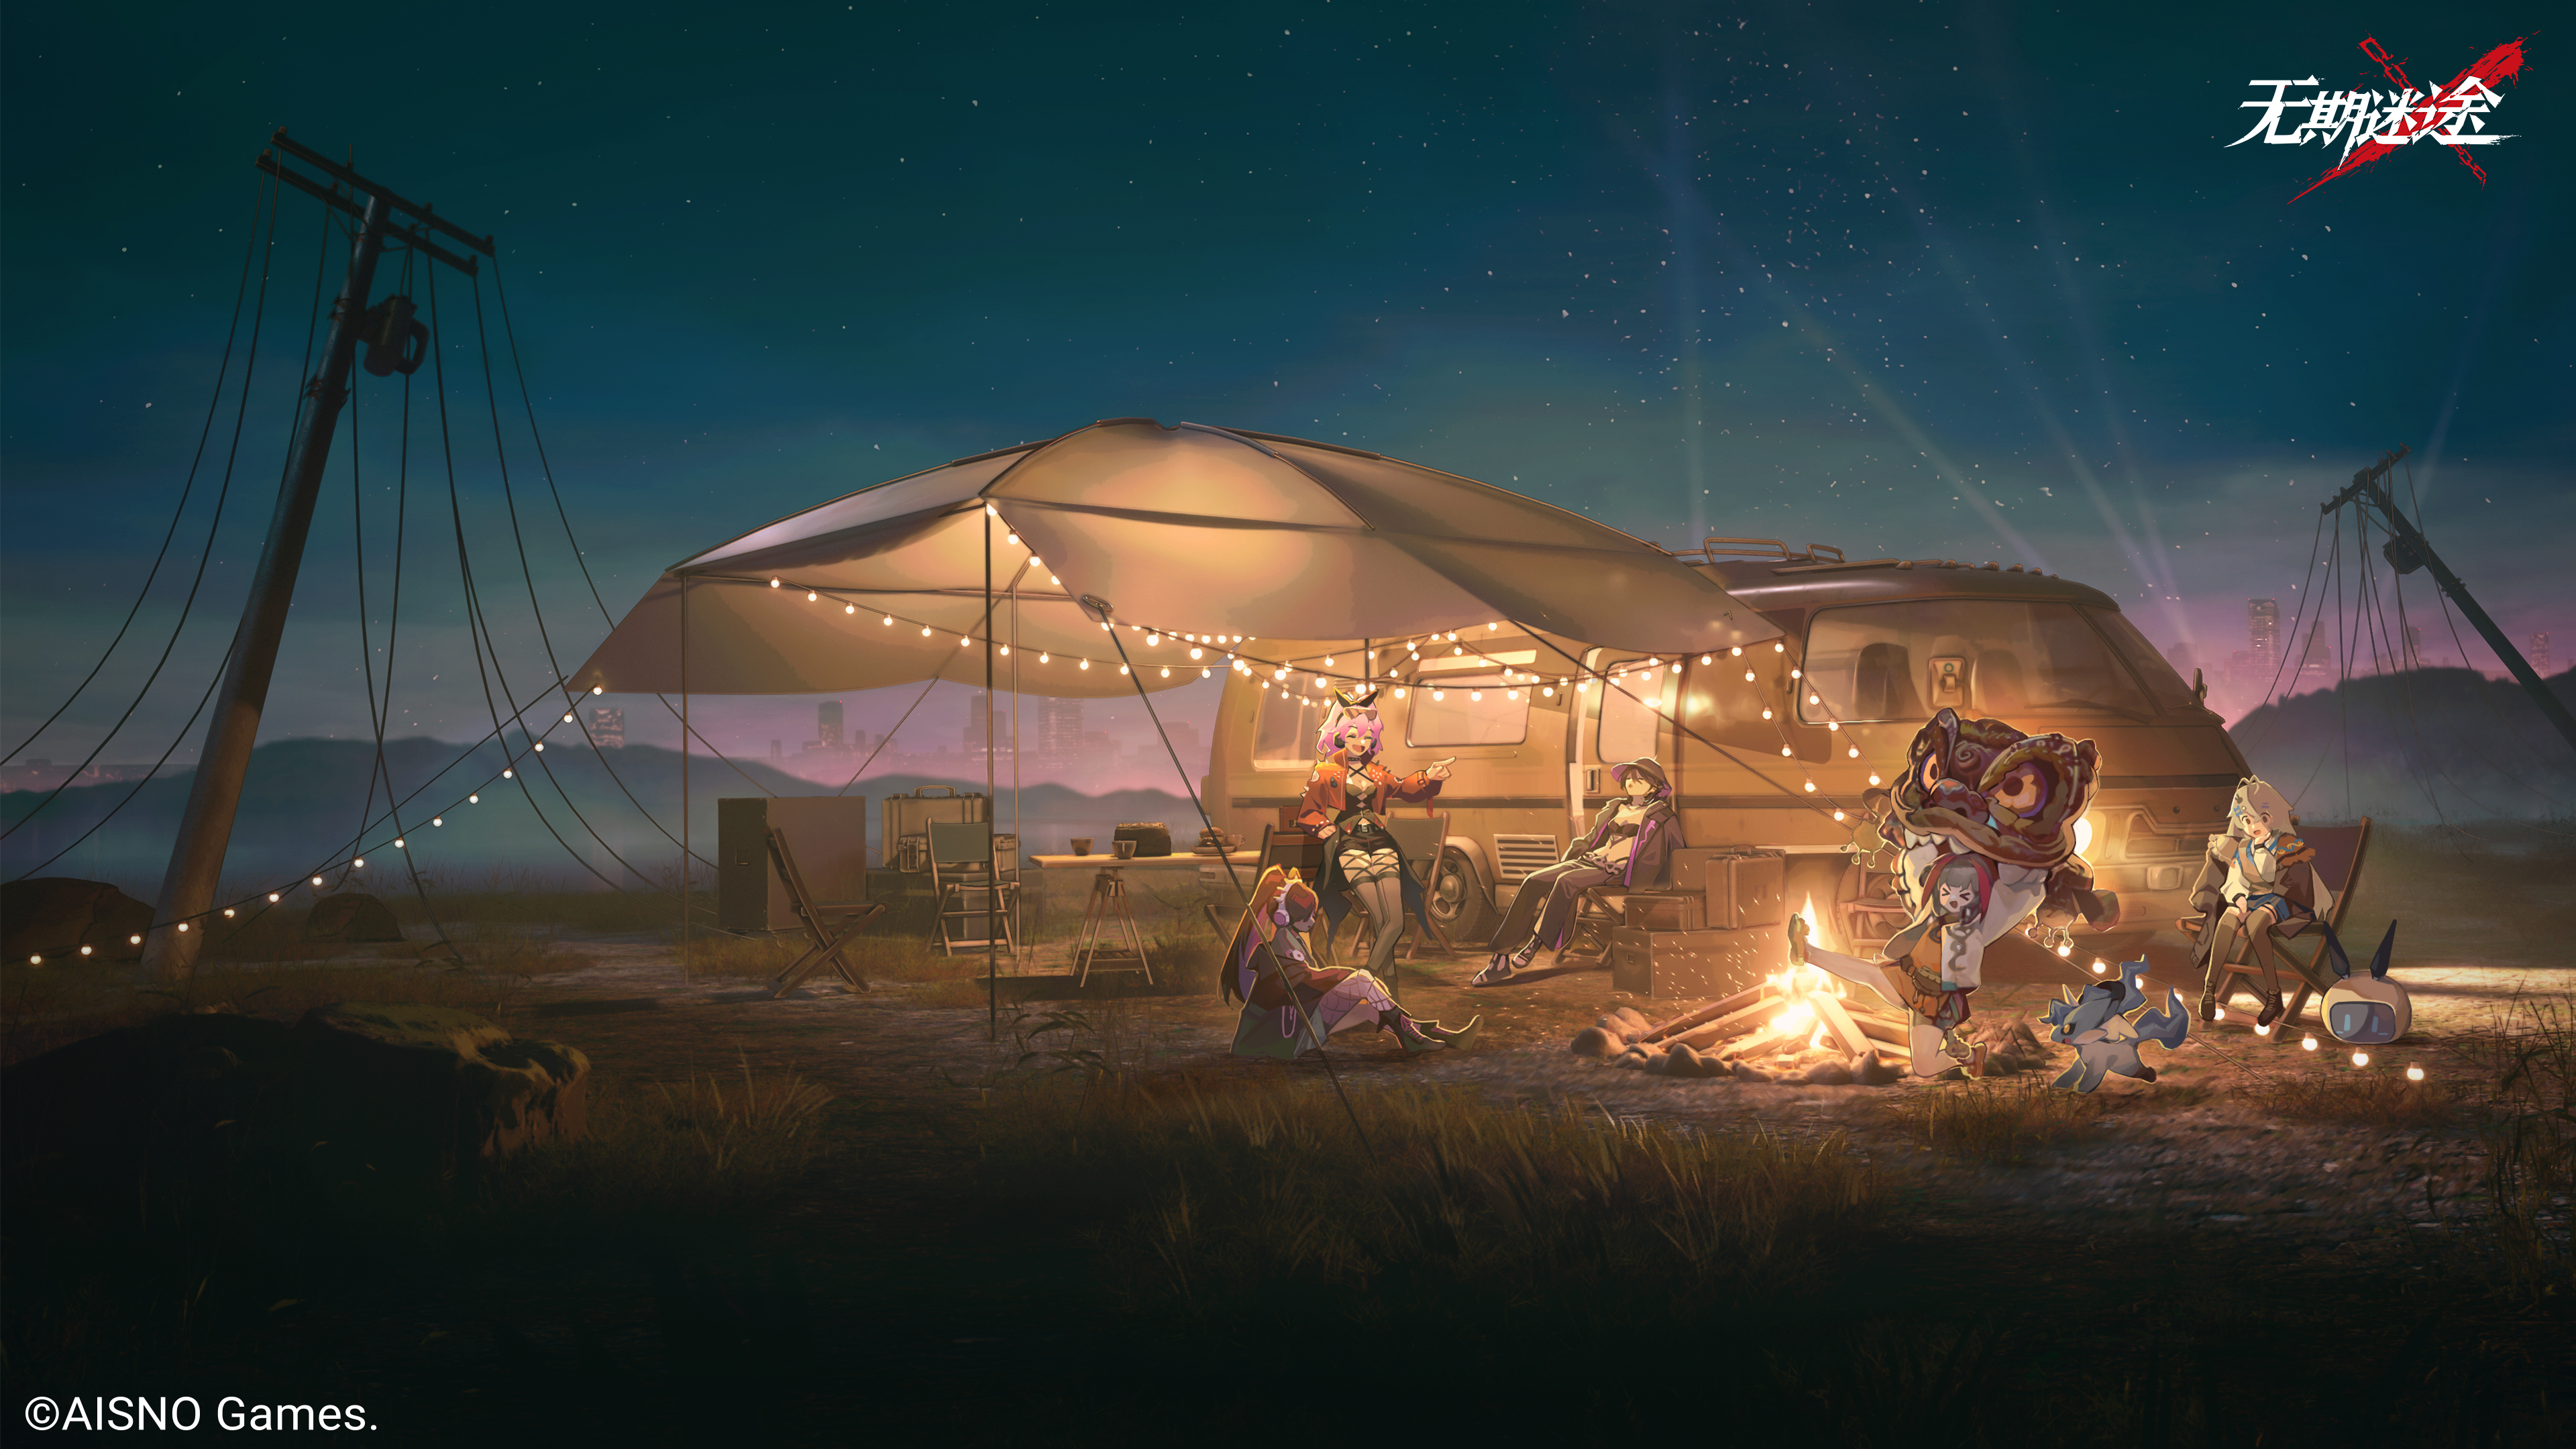 Campfire | Contest entry by PyonSangSang on DeviantArt